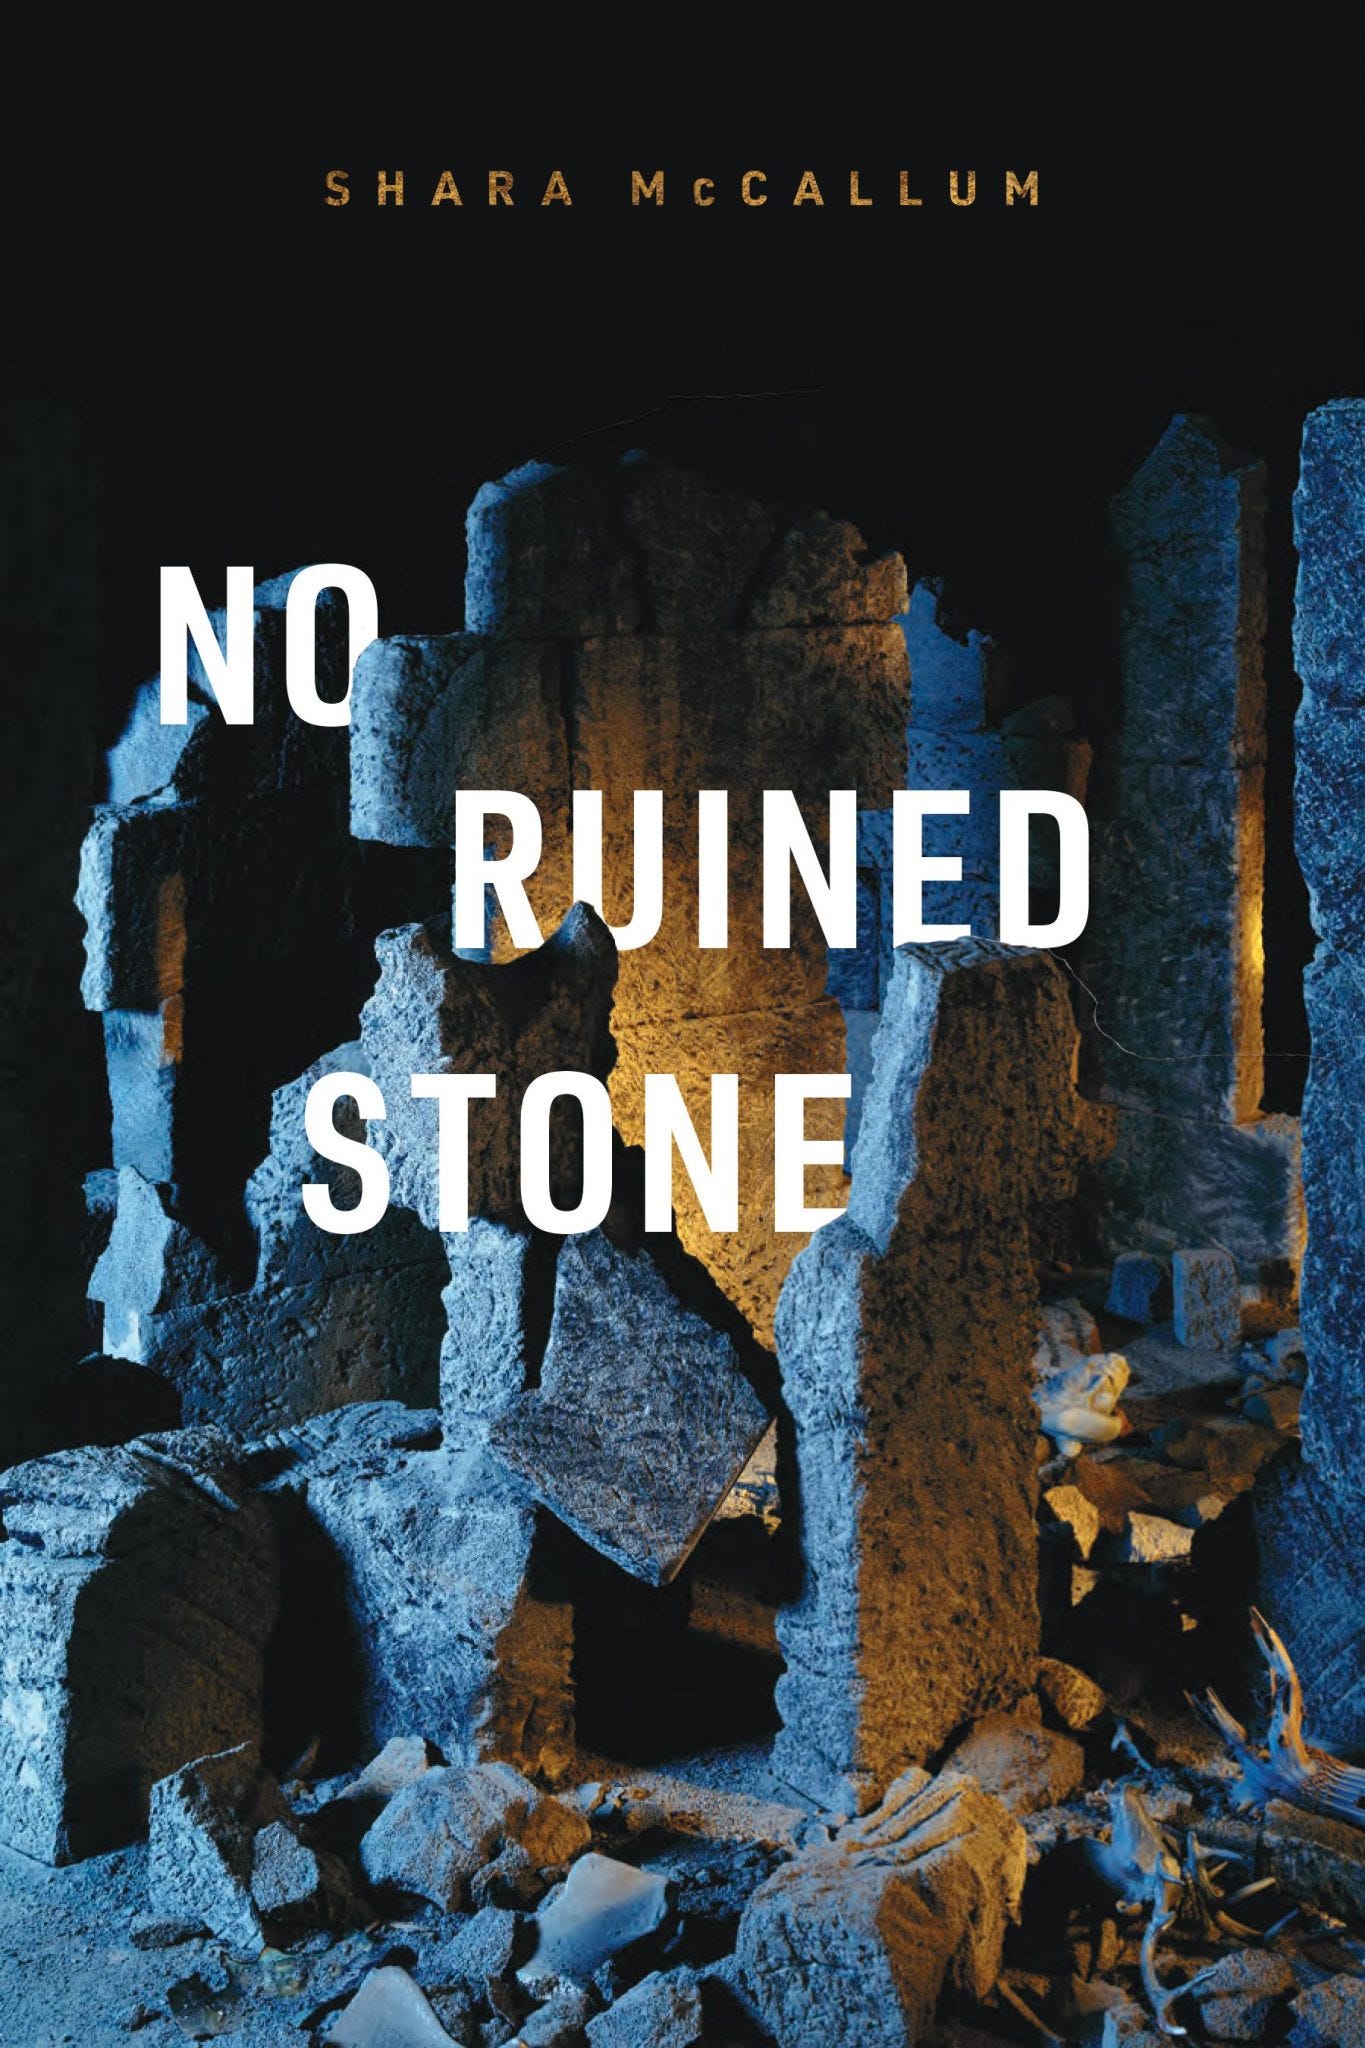 This is the book cover for No Ruined Stone by Shara McCallum